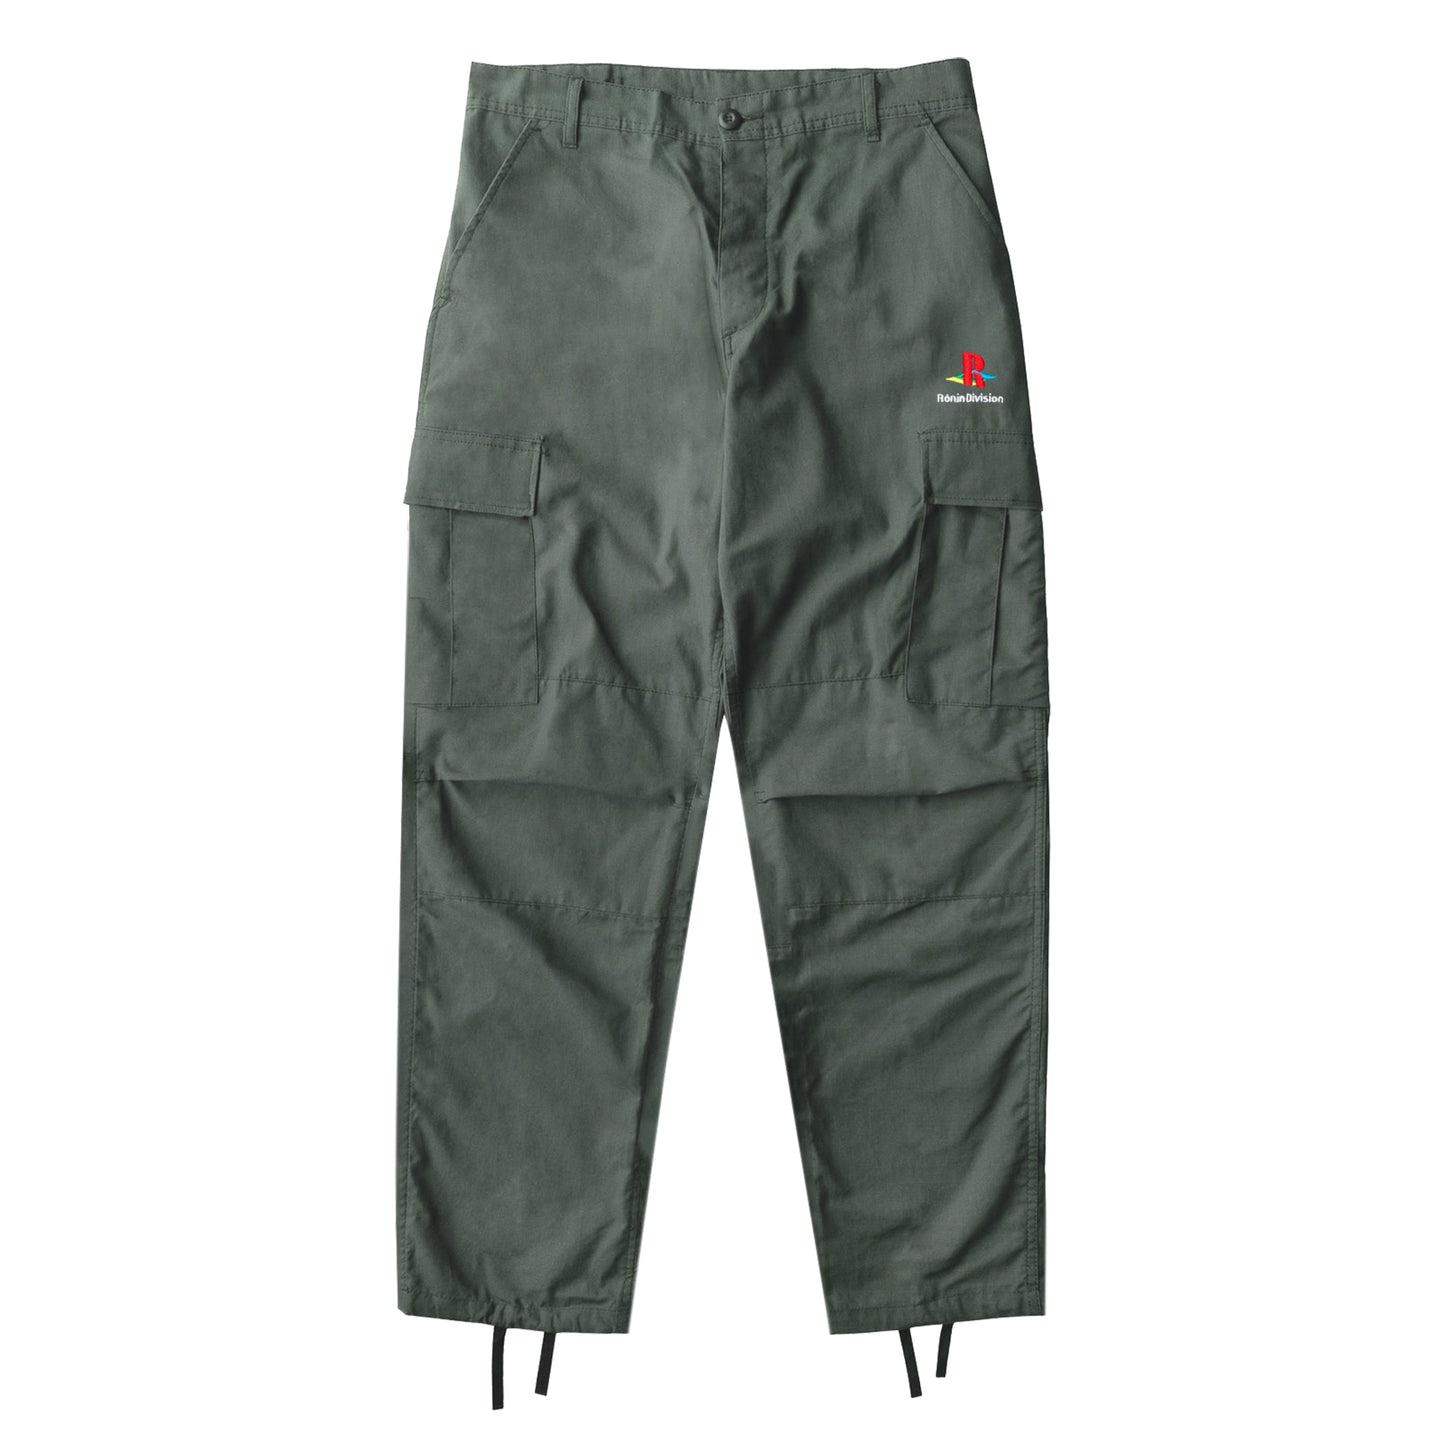 Play BDU Ripstop Cargo Pant - Olive